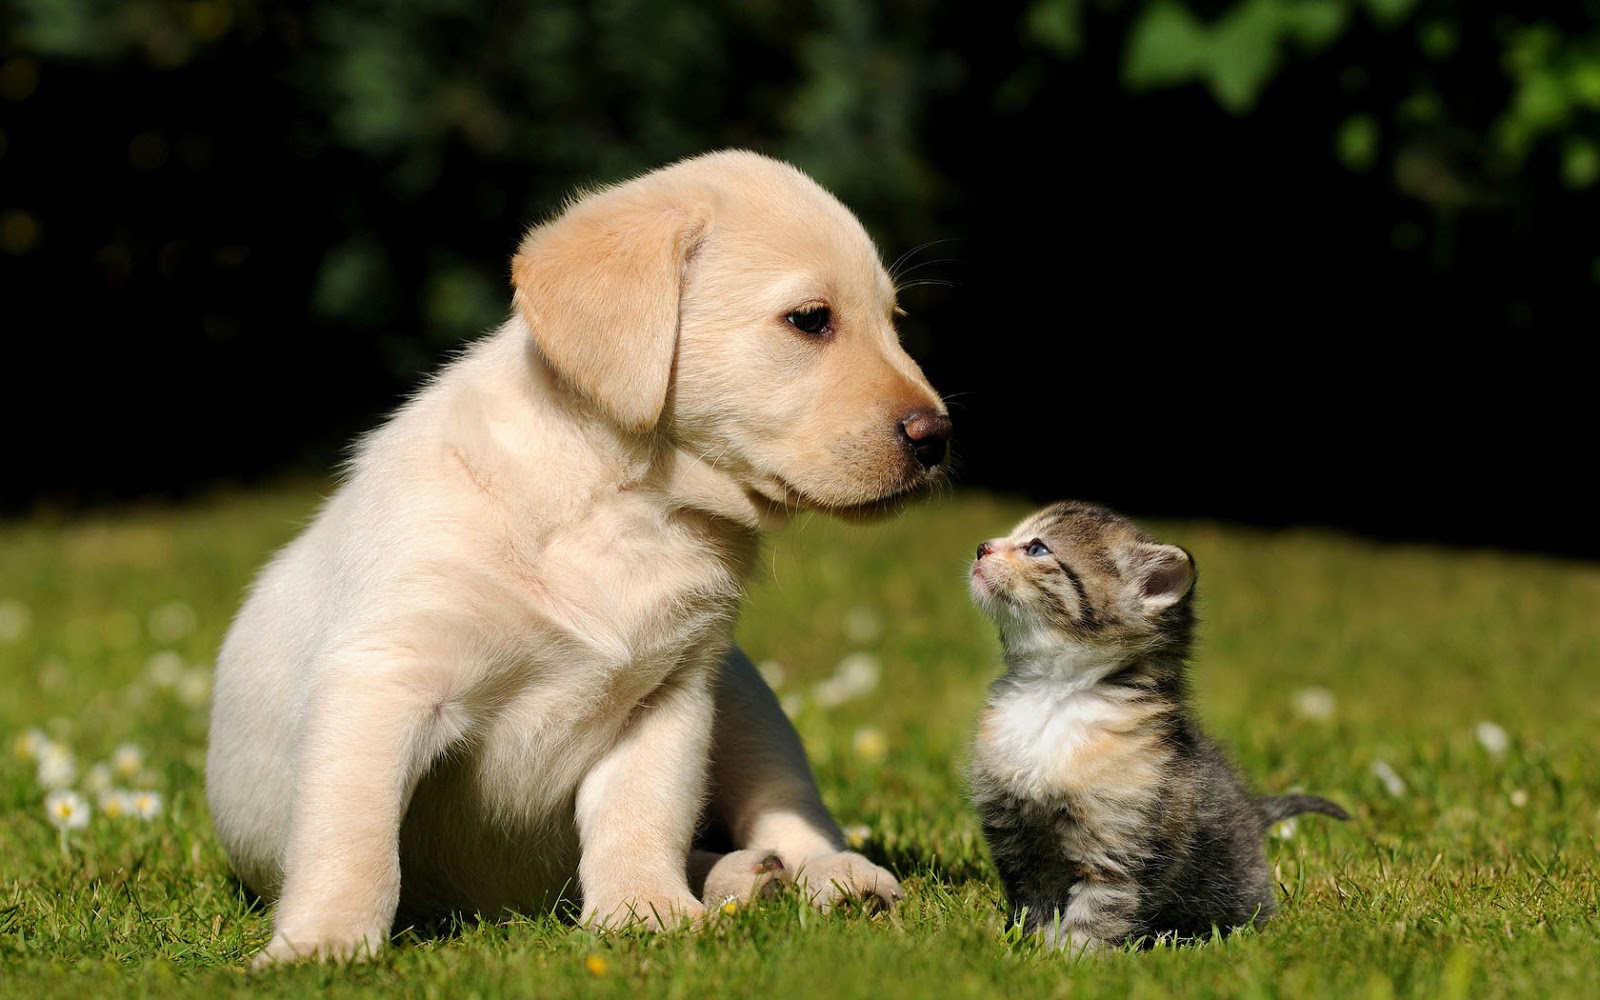 Cat And Dog On The Grass Wallpaper HD Animals